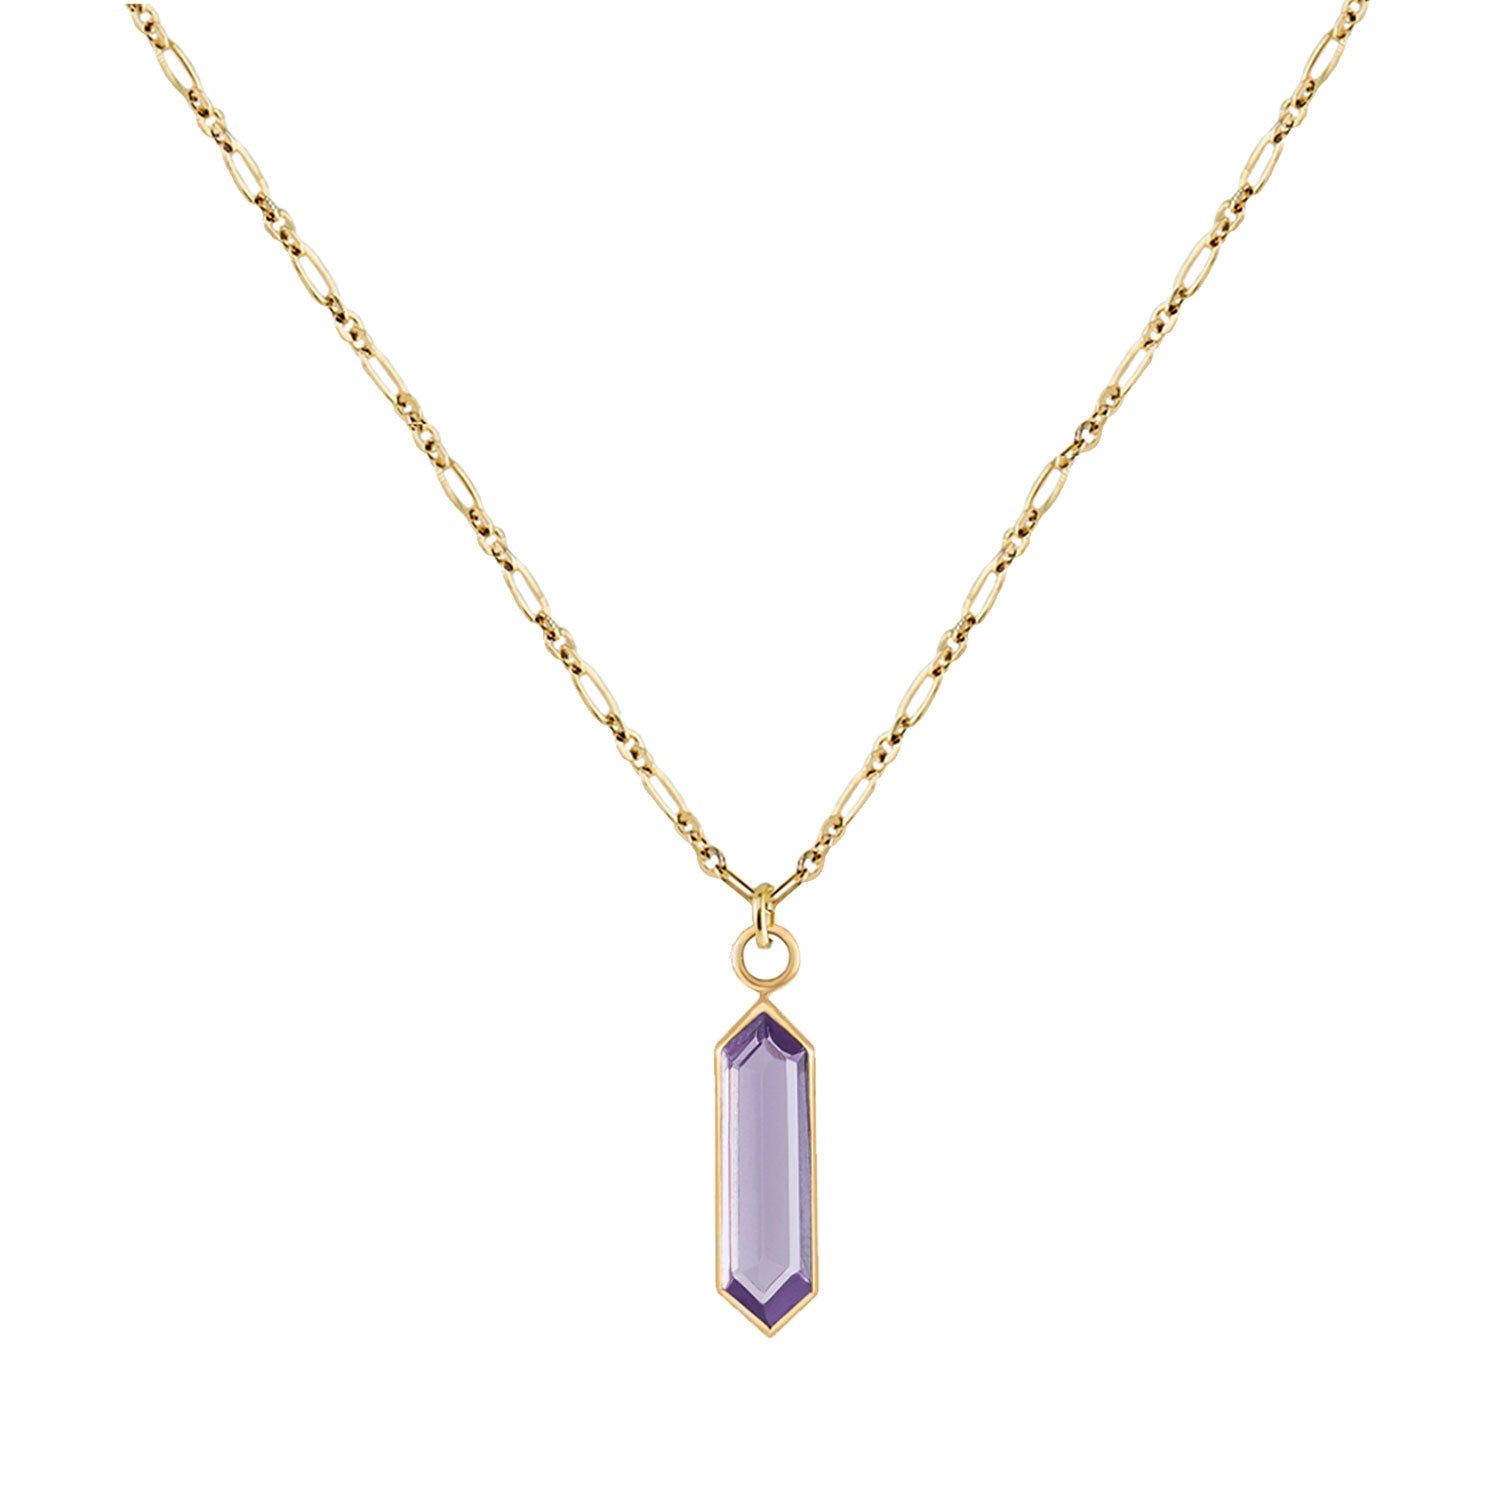 Metier by tomfoolery adjustable roma chain with lilac amethyst hexa plaque